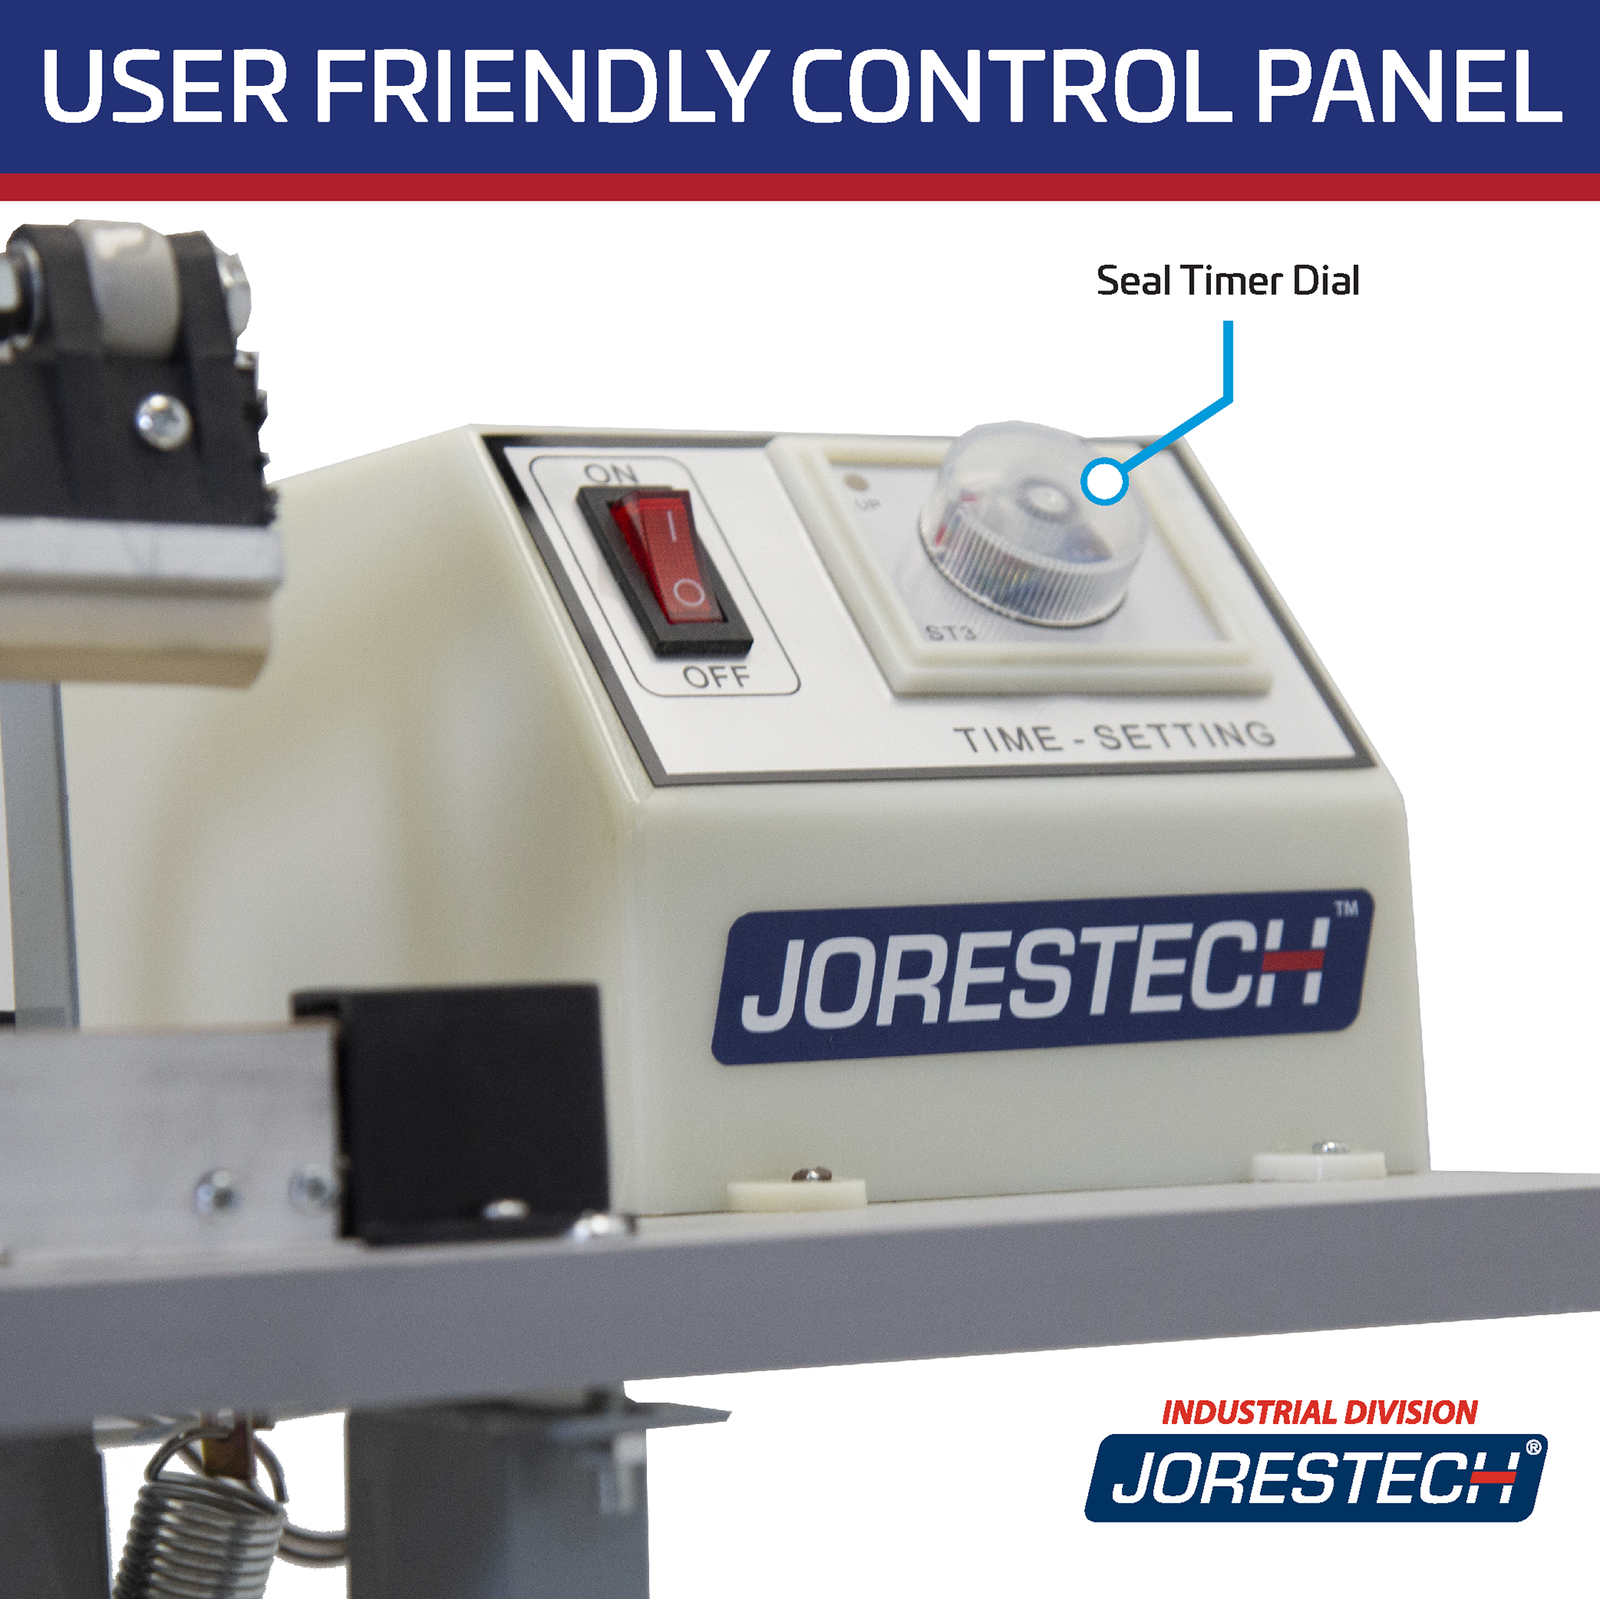 Titled reads: “User Friendly Control Panel” The image is zoomed in showing the details of the control panel and seal timer dial.